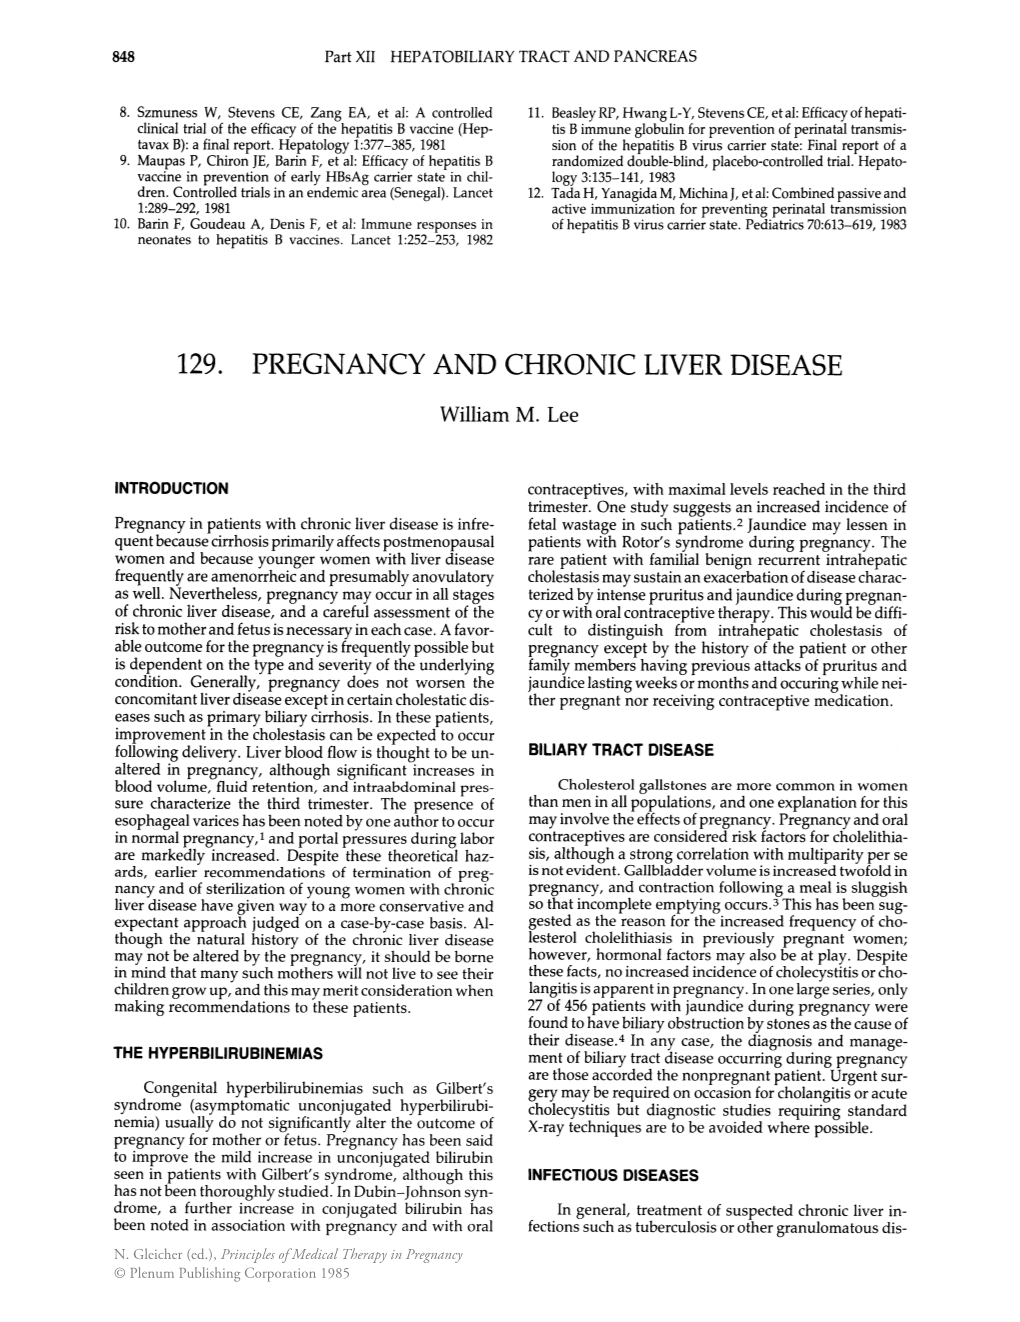 129. Pregnancy and Chronic Liver Disease